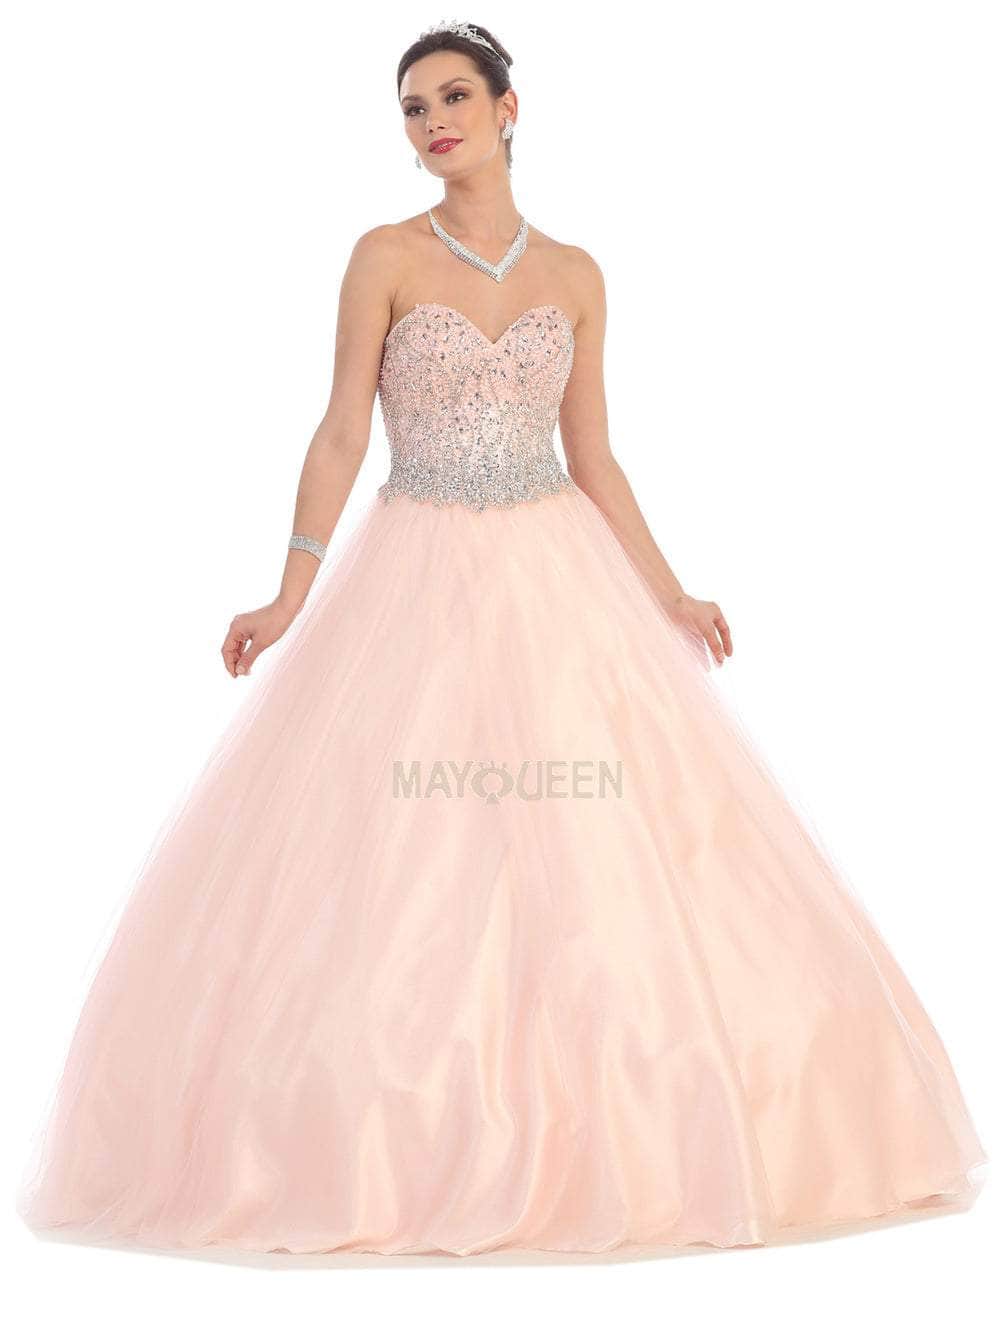 May Queen LK65 - Beaded Corset Bodice A-line Gown Special Occasion Dress